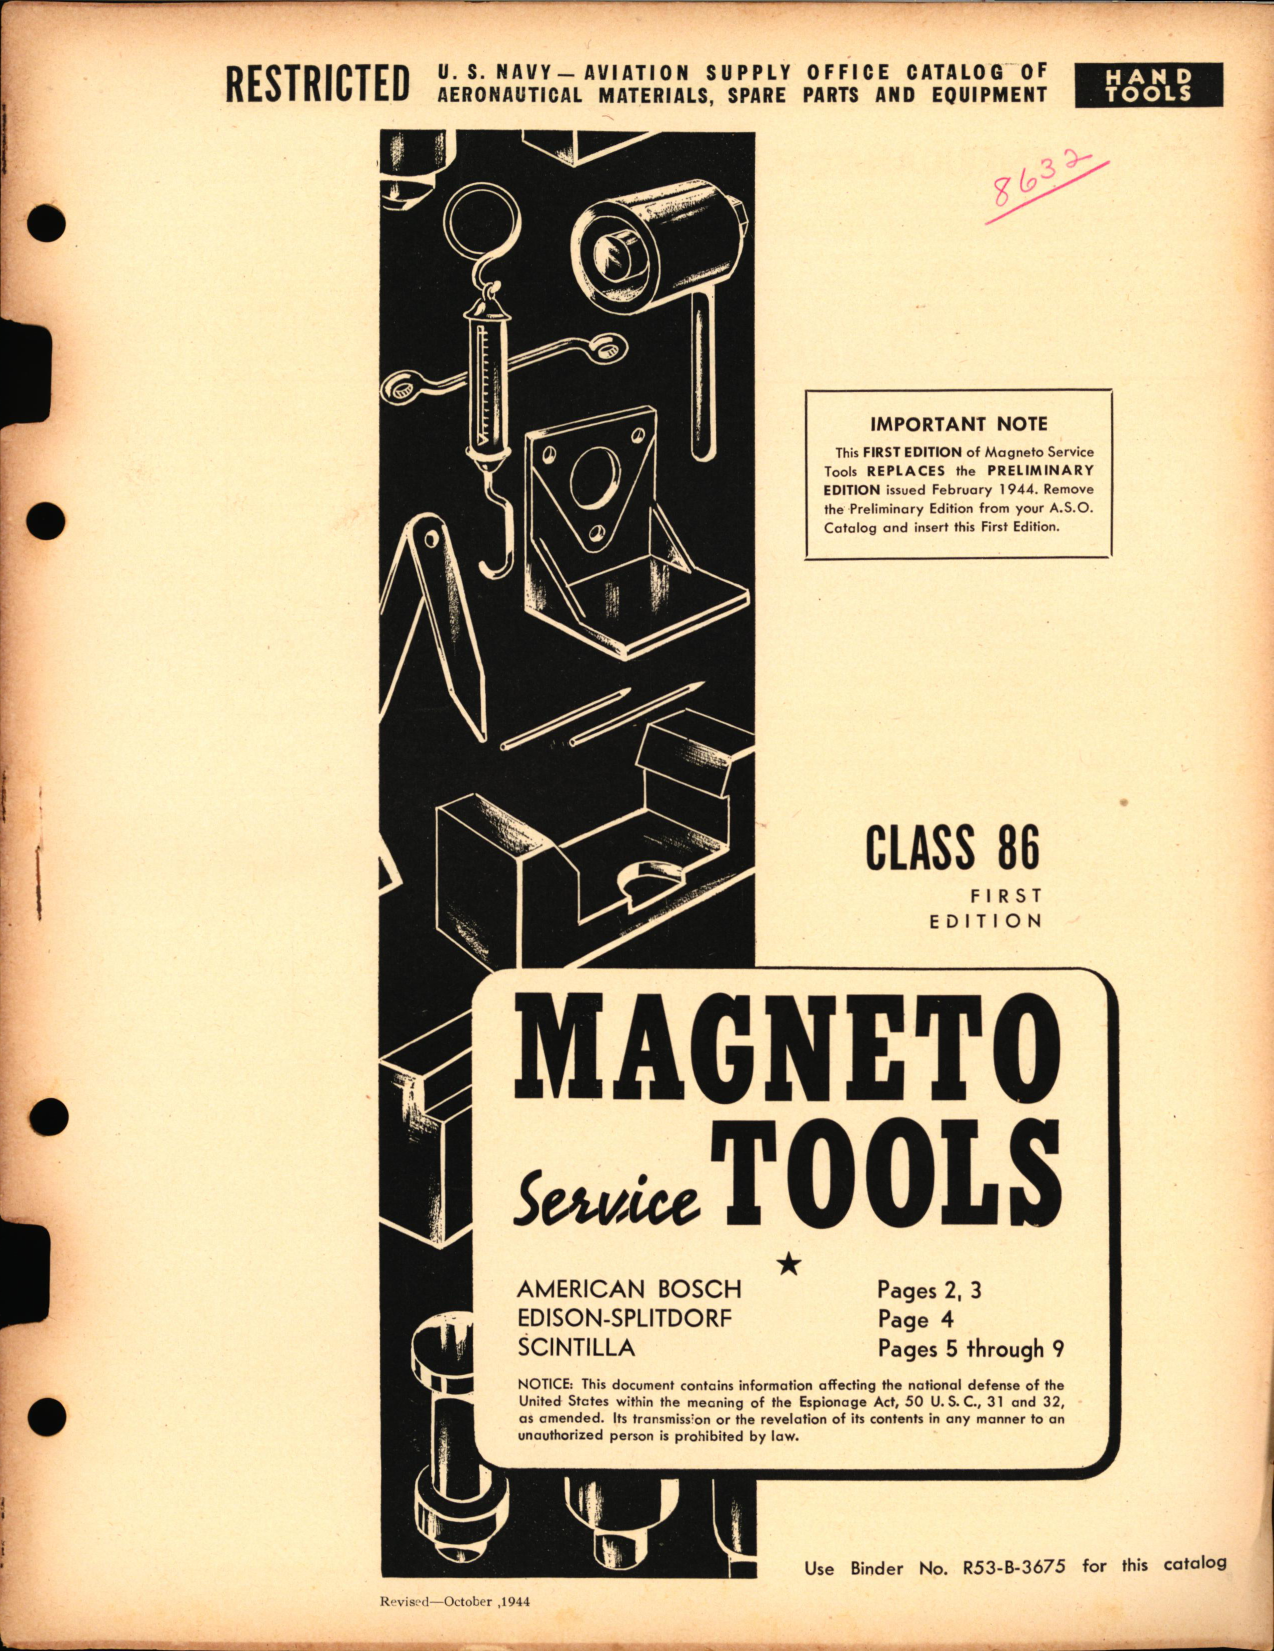 Sample page 1 from AirCorps Library document: Magneto Service Tools